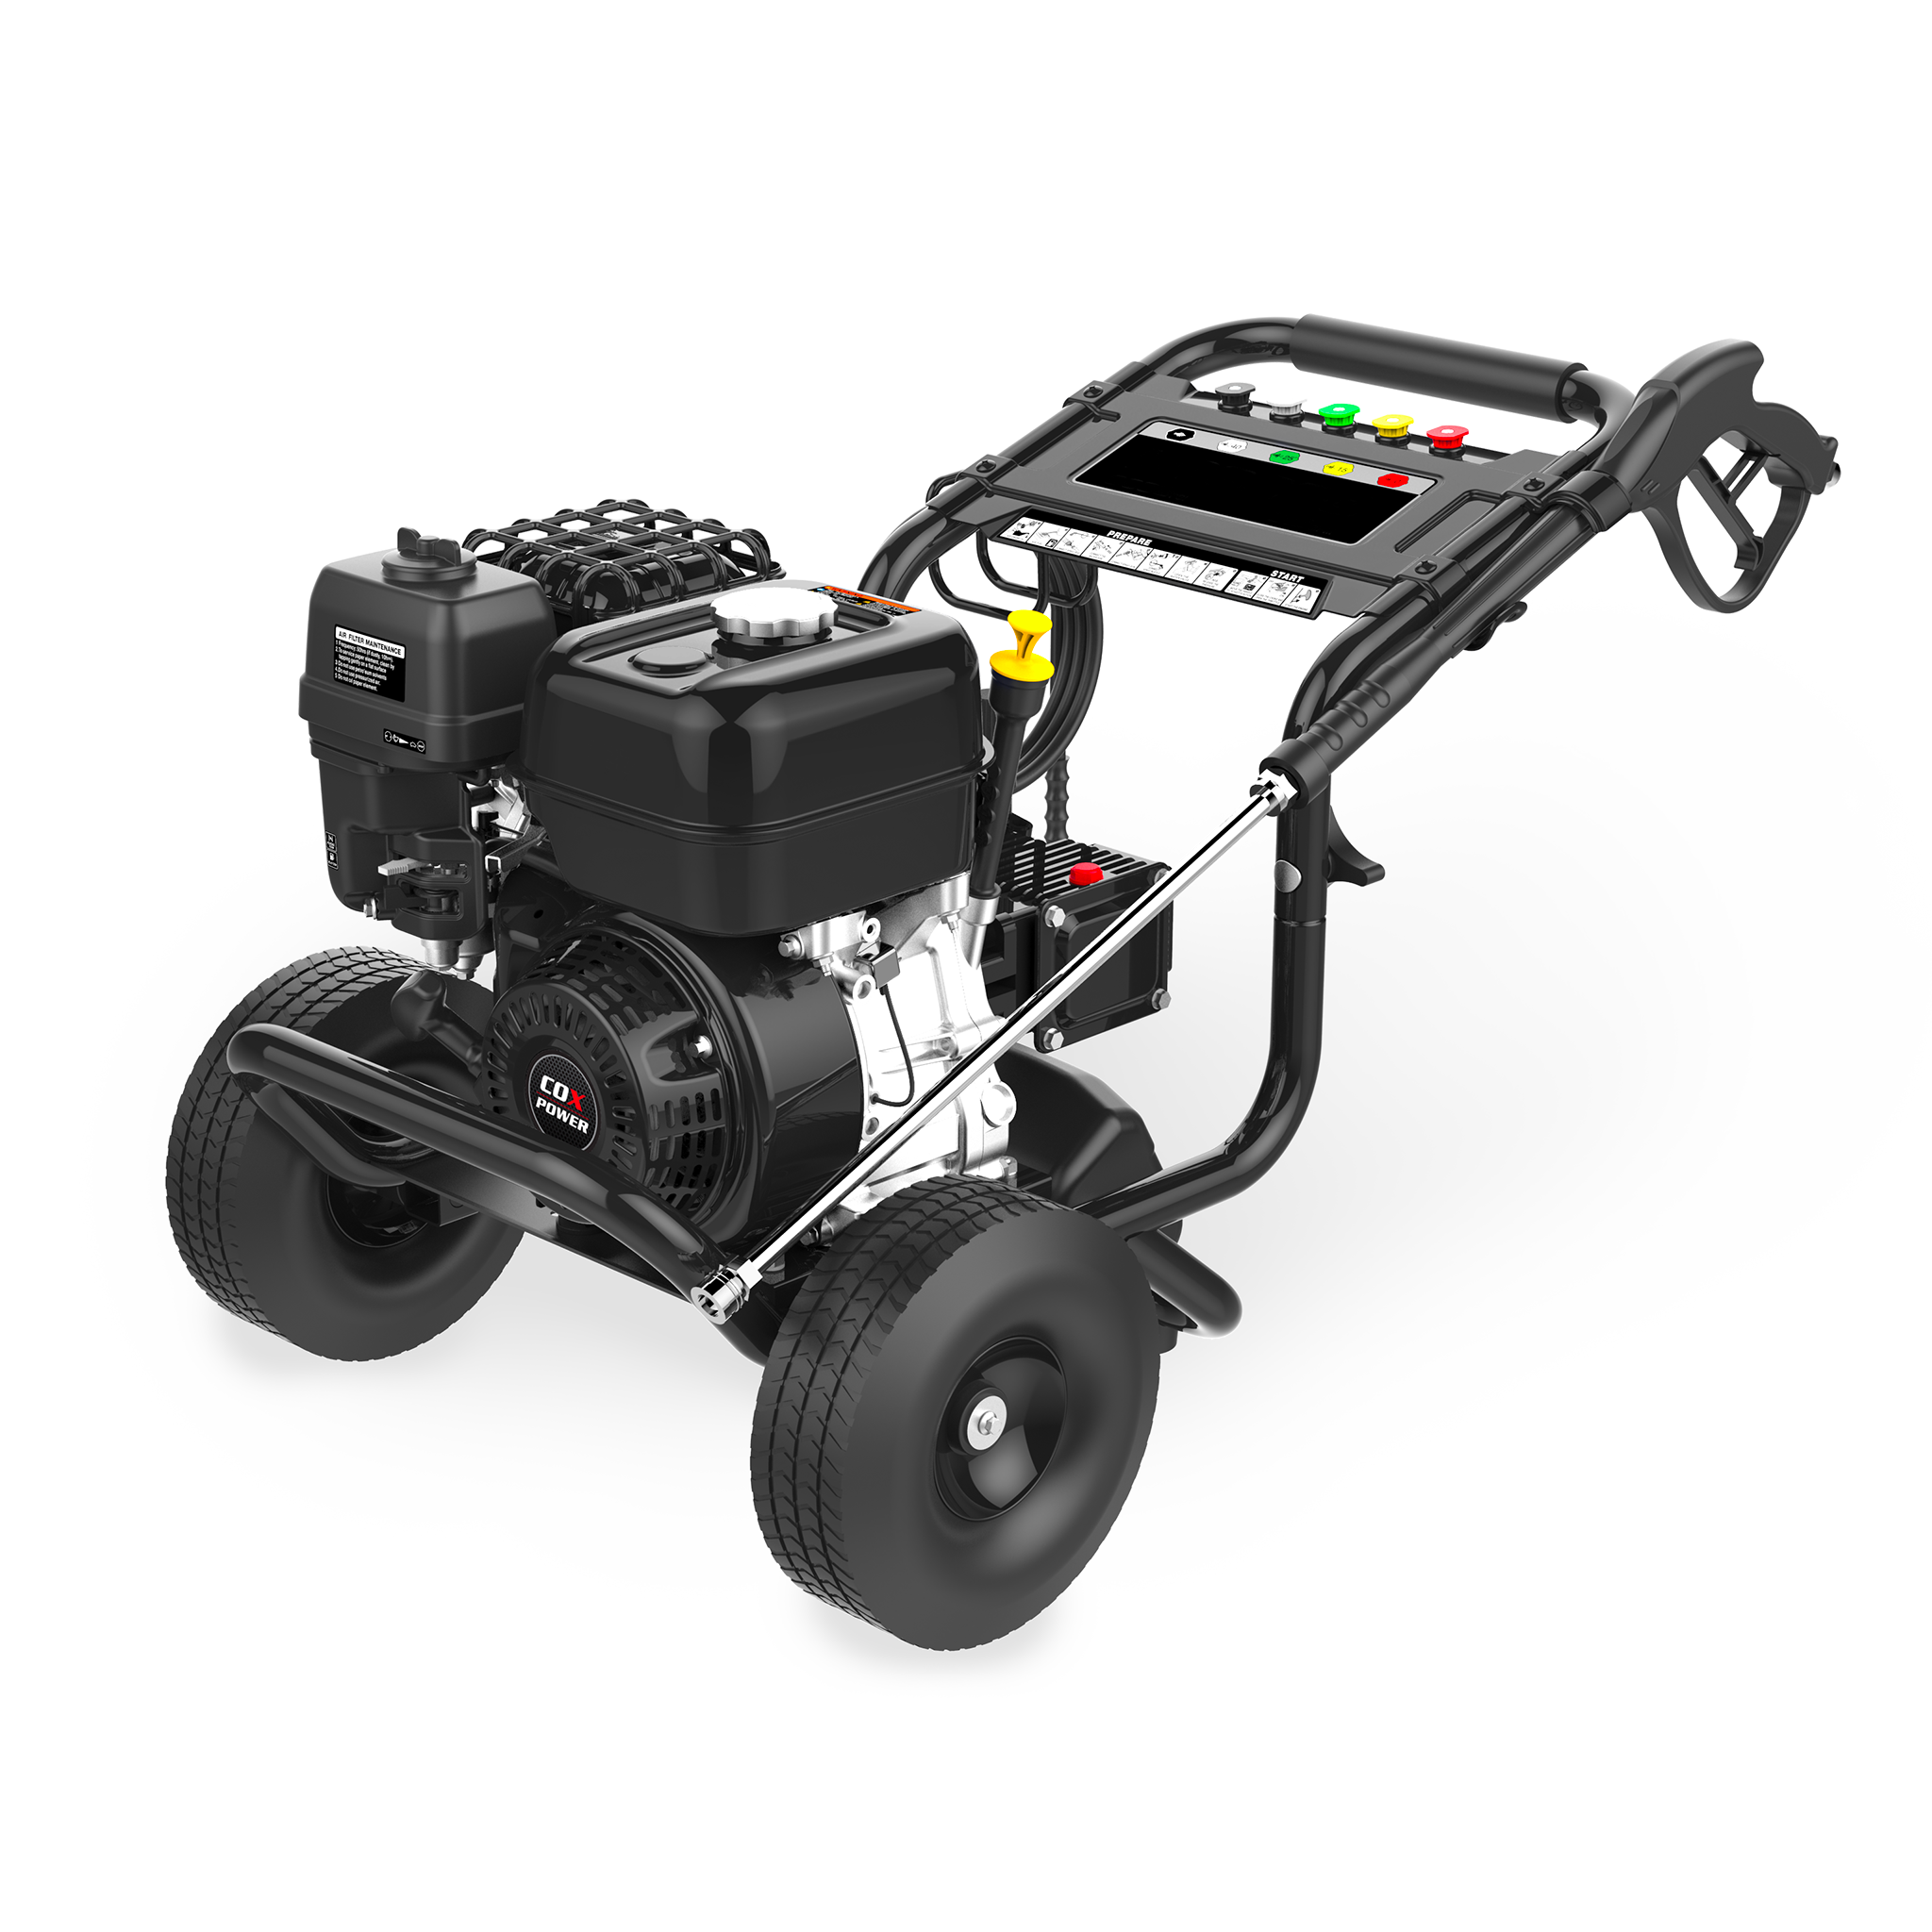 COX Power Pressure Washer 3600psi Product Image